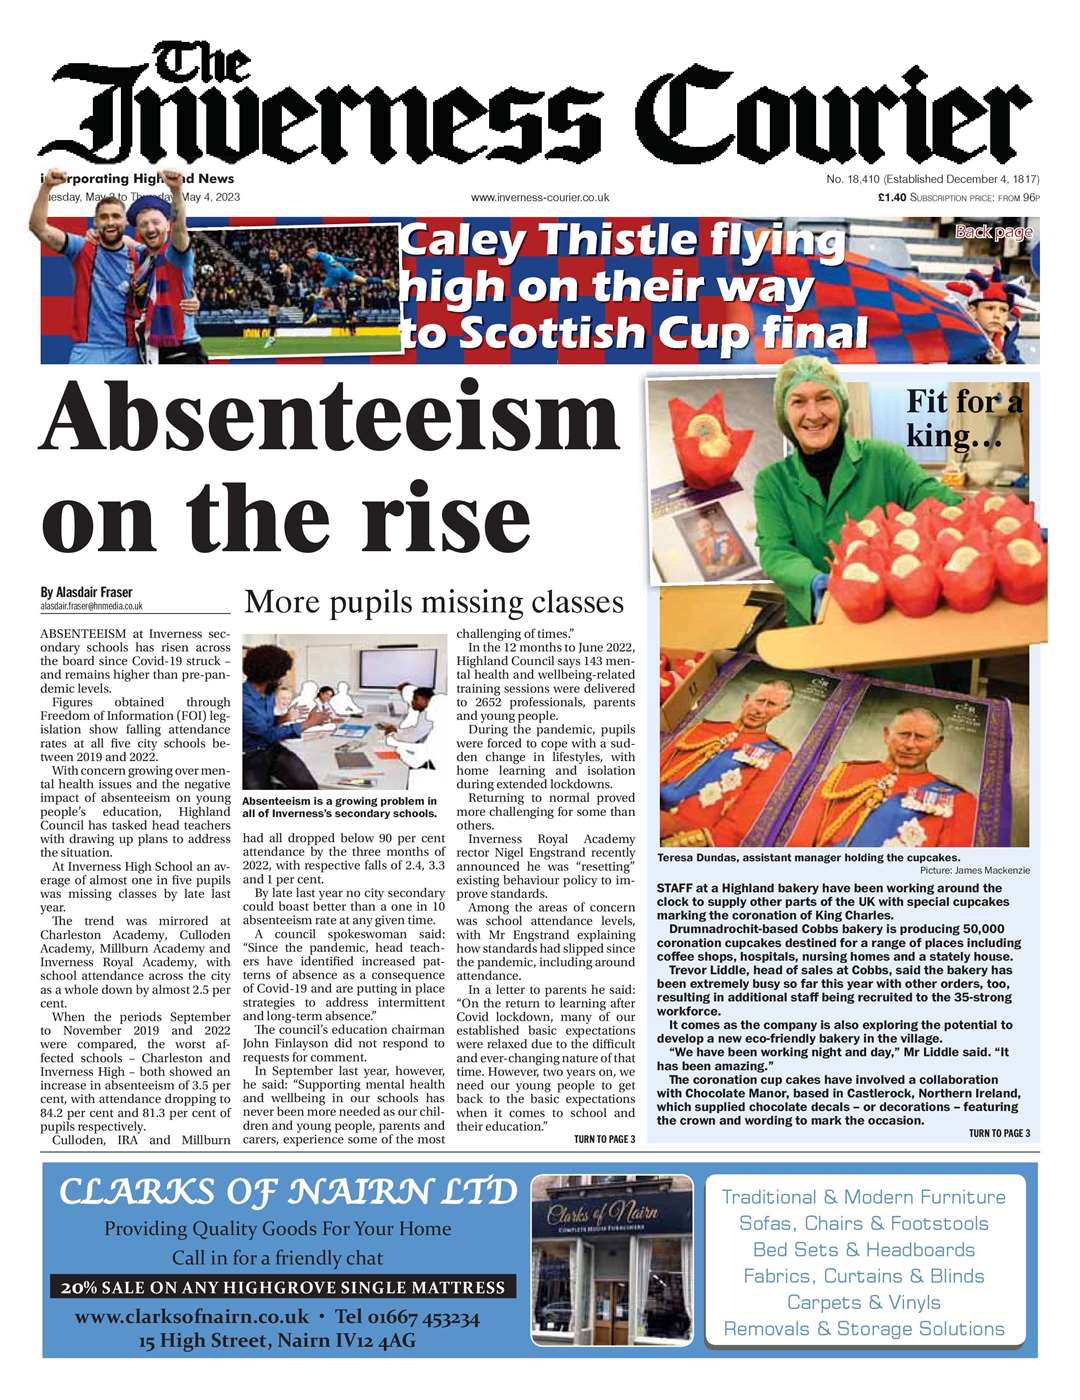 The Inverness Courier, May 2, front page.